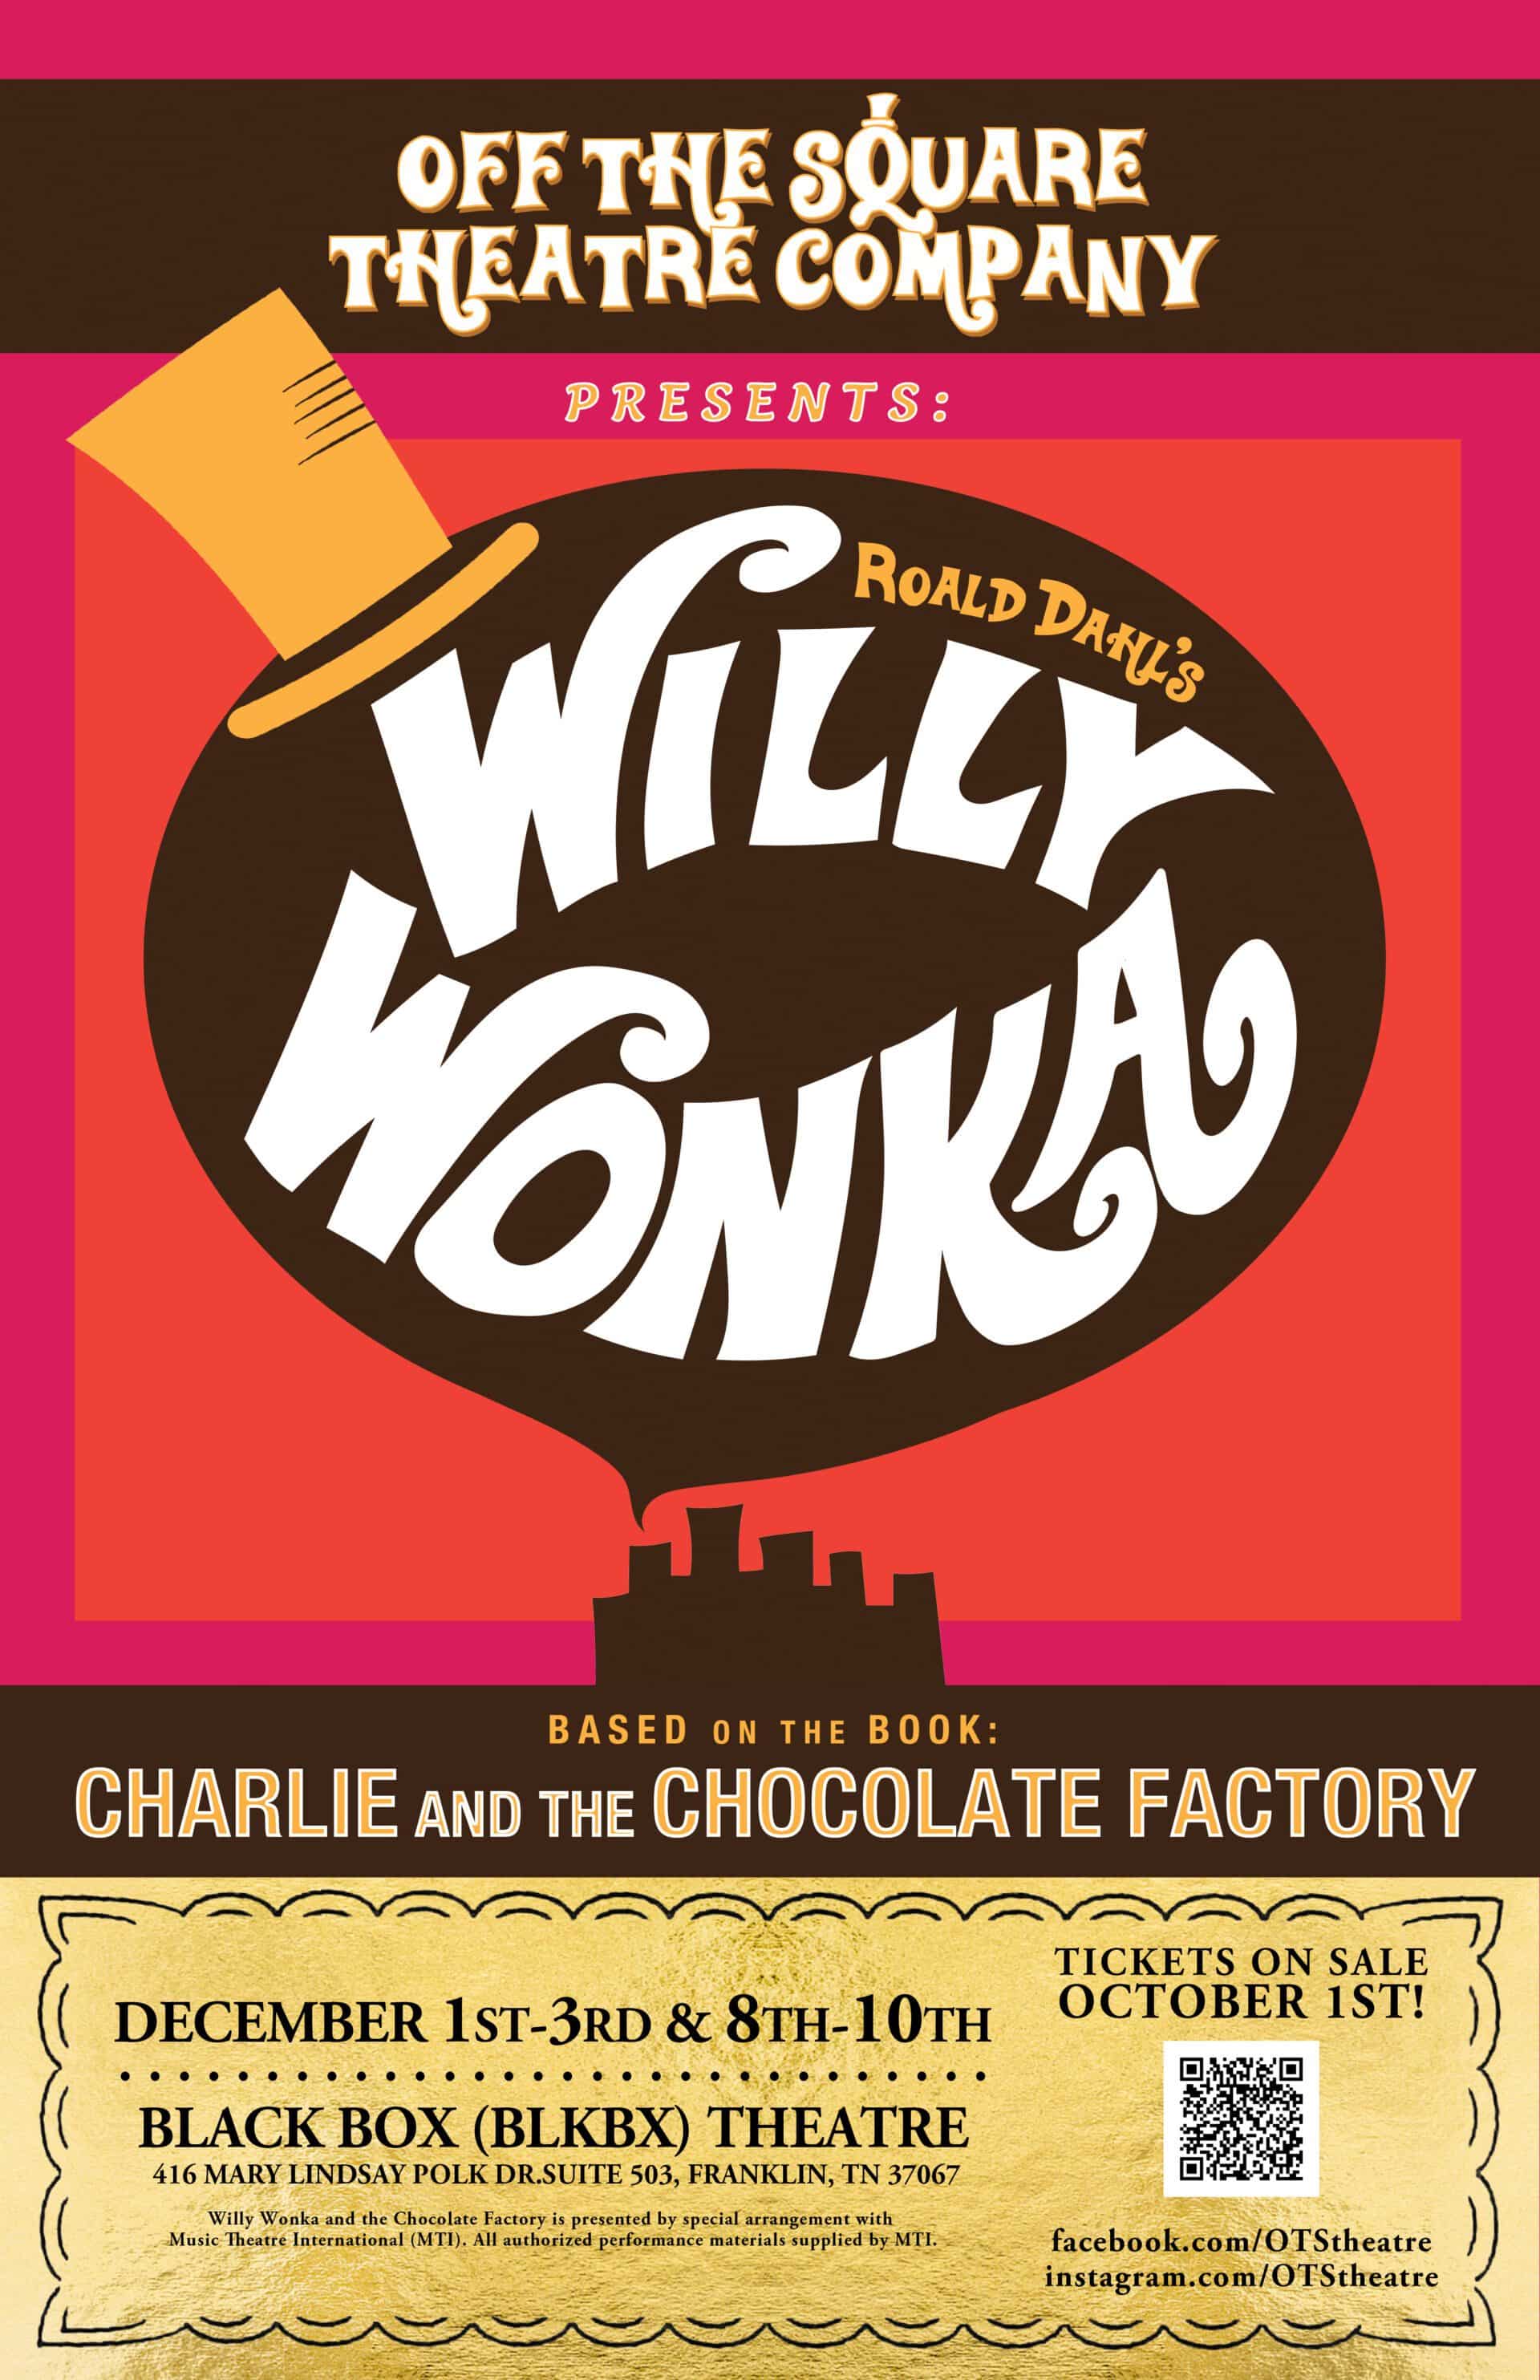 Off The Square Theatre presents Roald Dahl's Willy Wonka, A Franklin, TN Event.